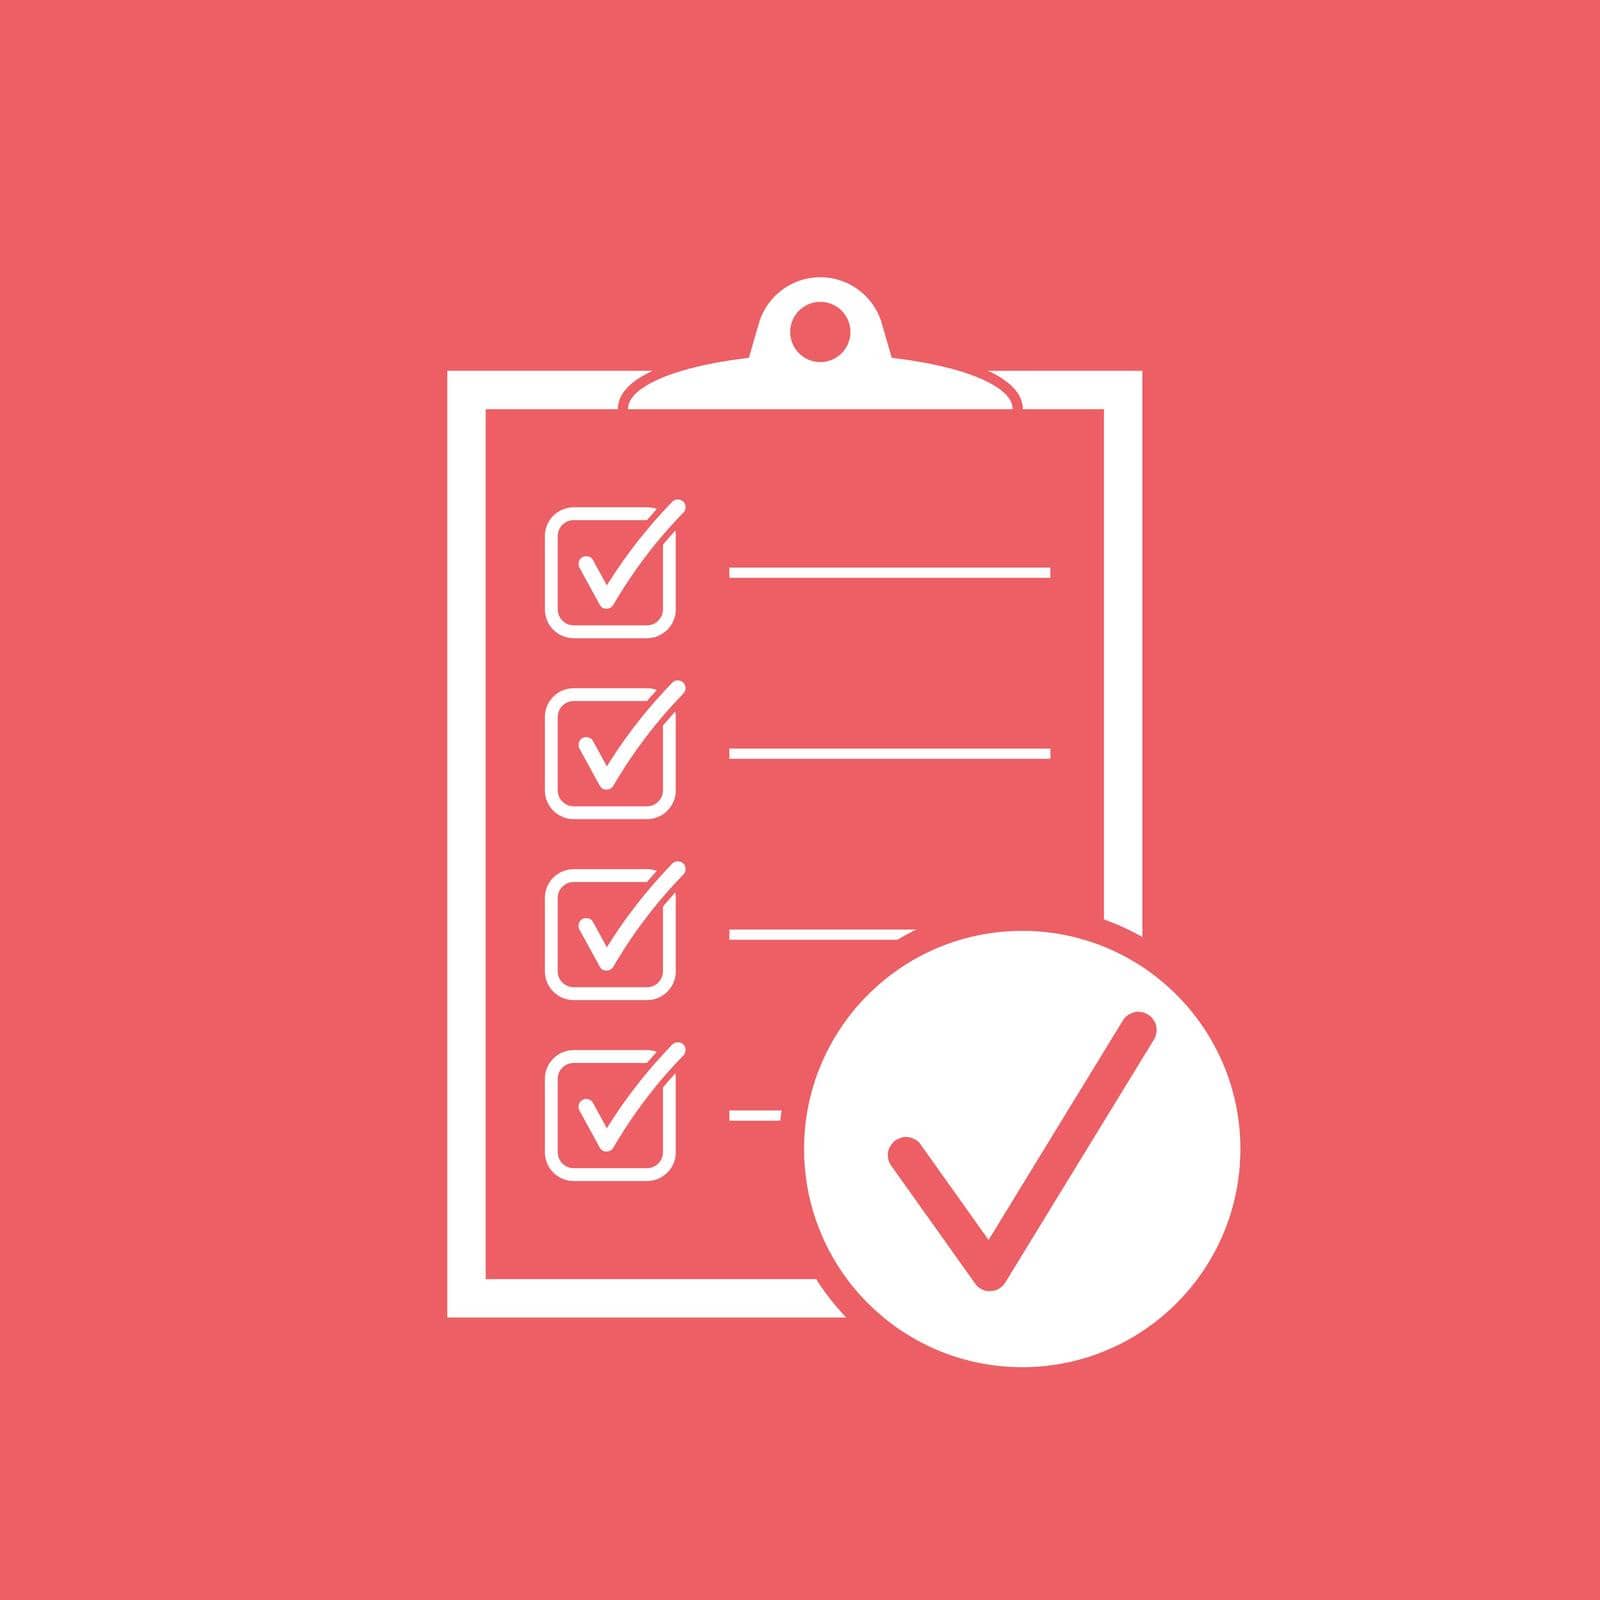 Checklist vector icon. Survey vector illustration in flat design on red background.